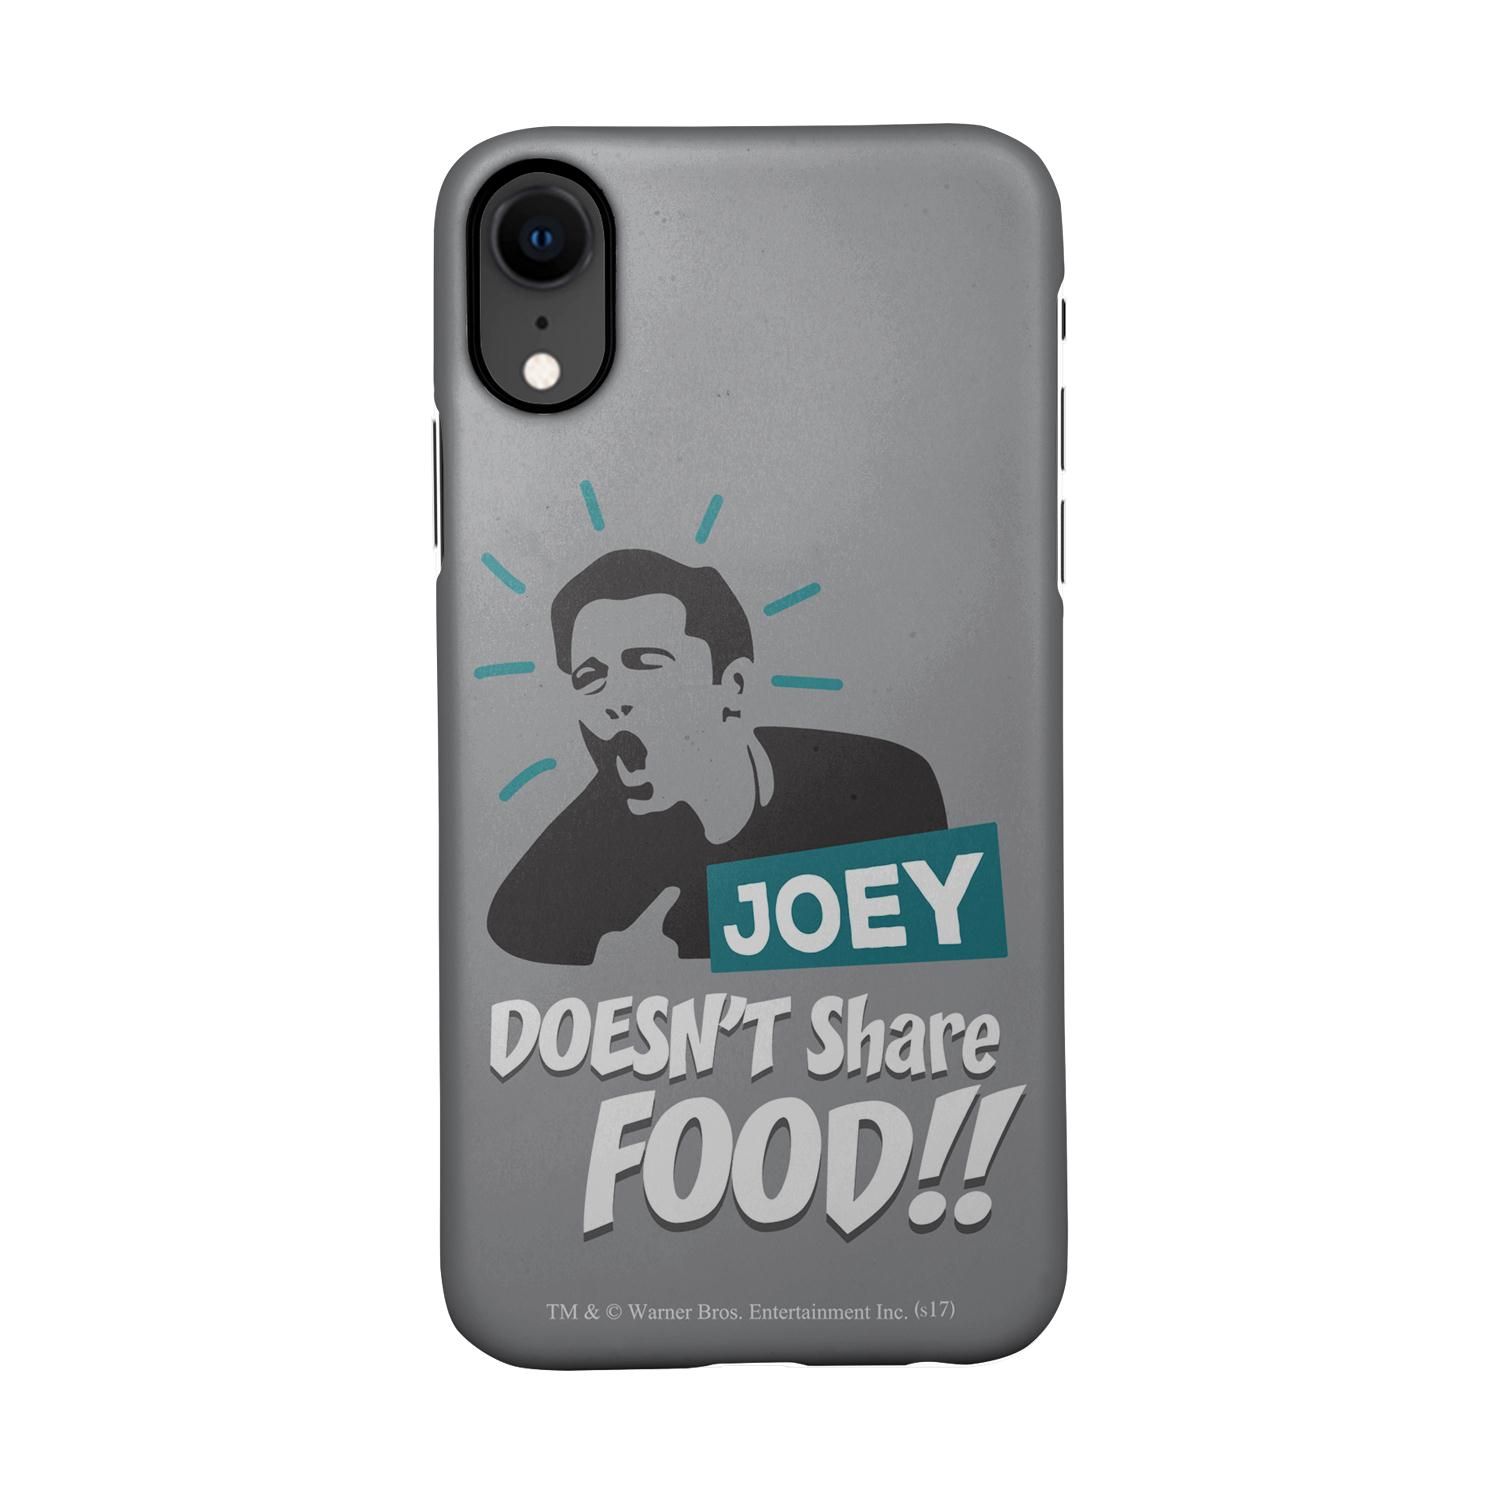 Buy Friends Joey doesnt share food - Sleek Phone Case for iPhone XR Online